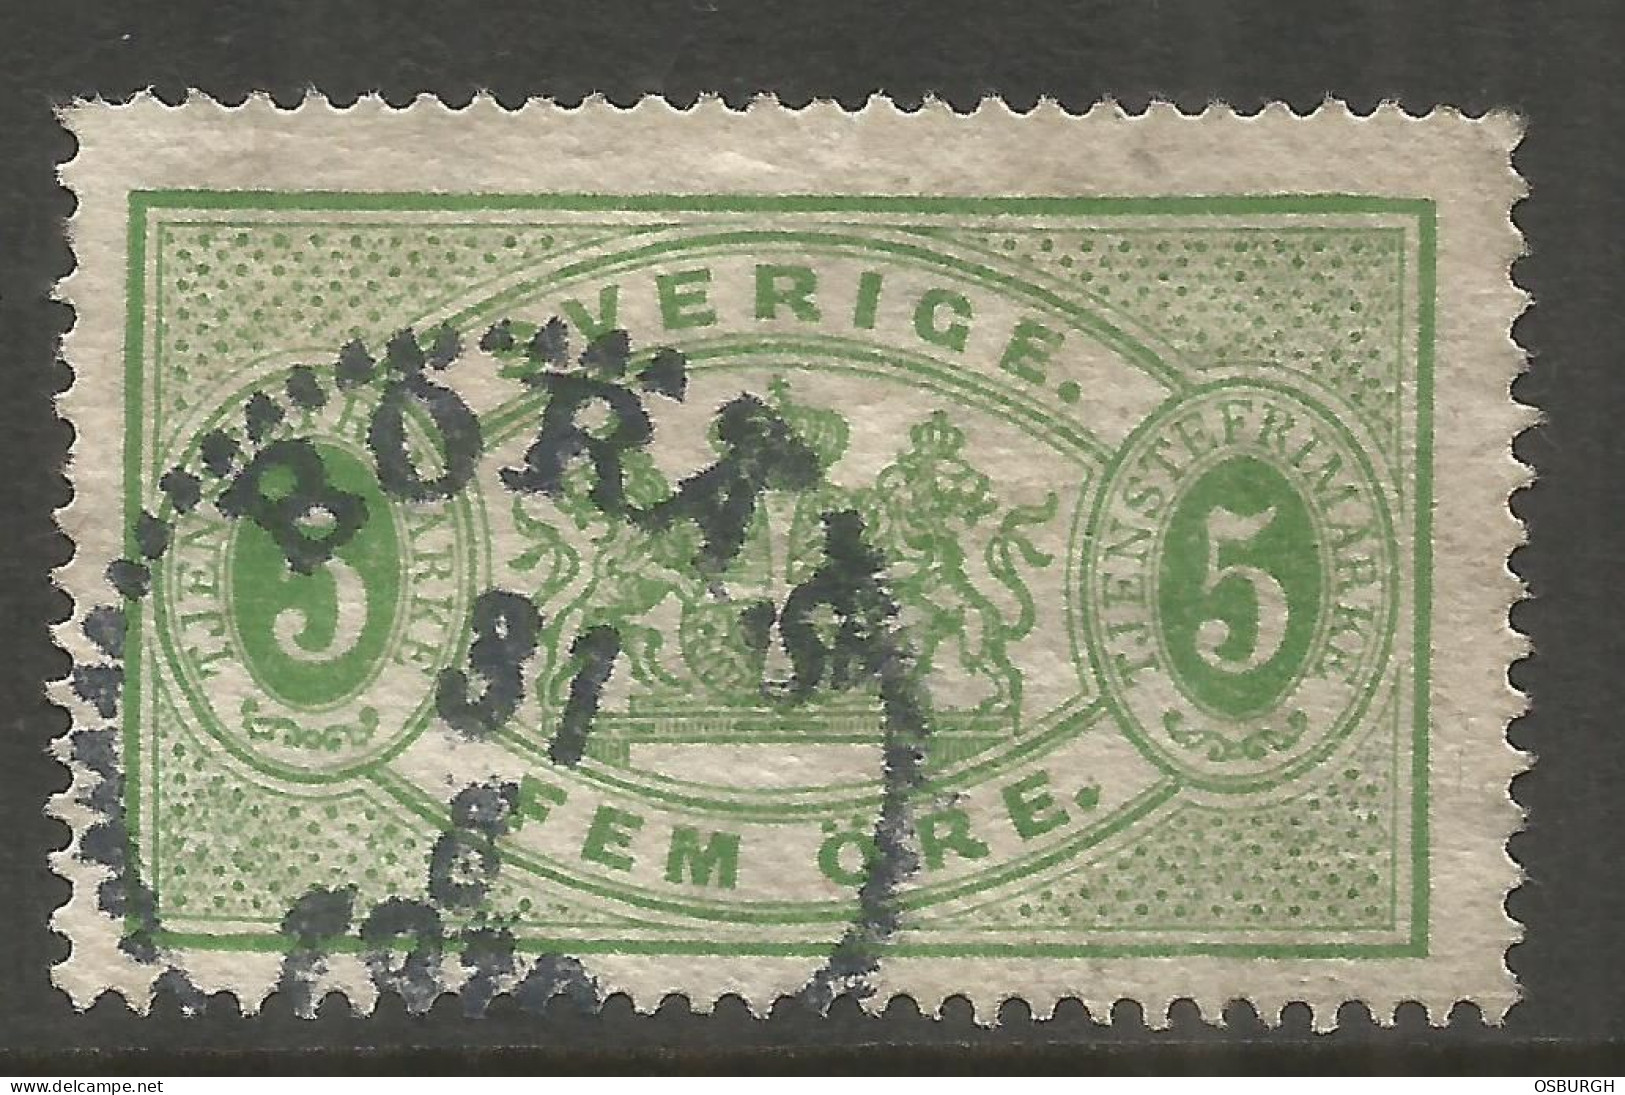 SWEDEN. OFFICIAL. 5o USED BORAS POSTMARK. - Oficiales